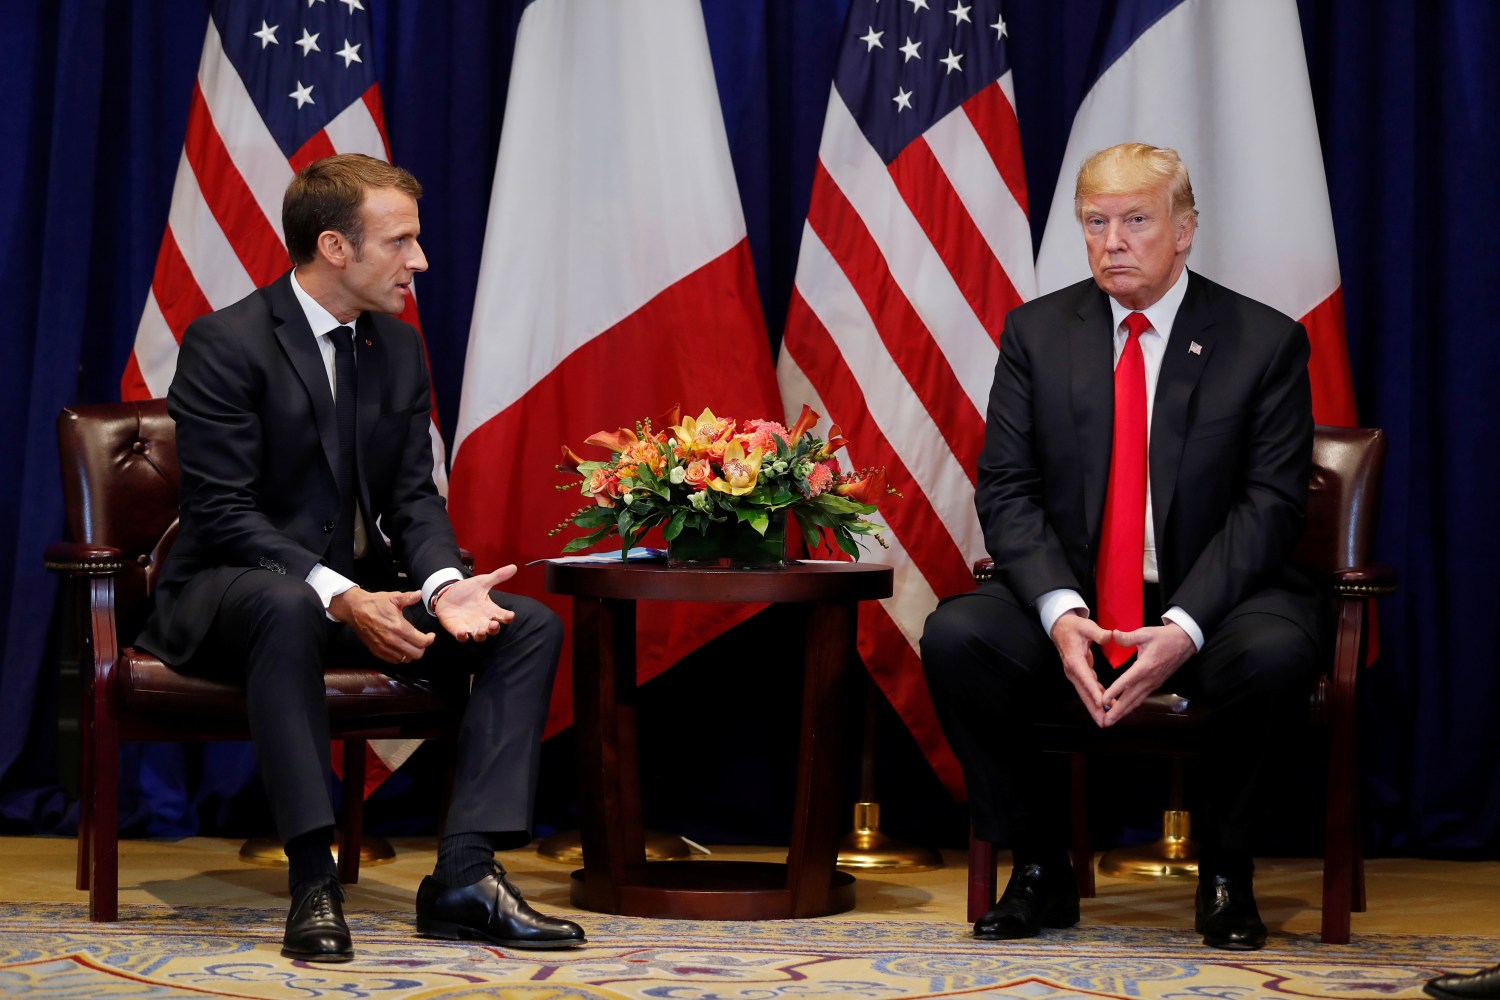 France's President Emmanuel Macron speaks to U.S. President Donald Trump as they hold a bilateral meeting on the sidelines of the 73rd United Nations General Assembly in New York, U.S., September 24, 2018. REUTERS/Carlos Barria - RC13D2AE5120